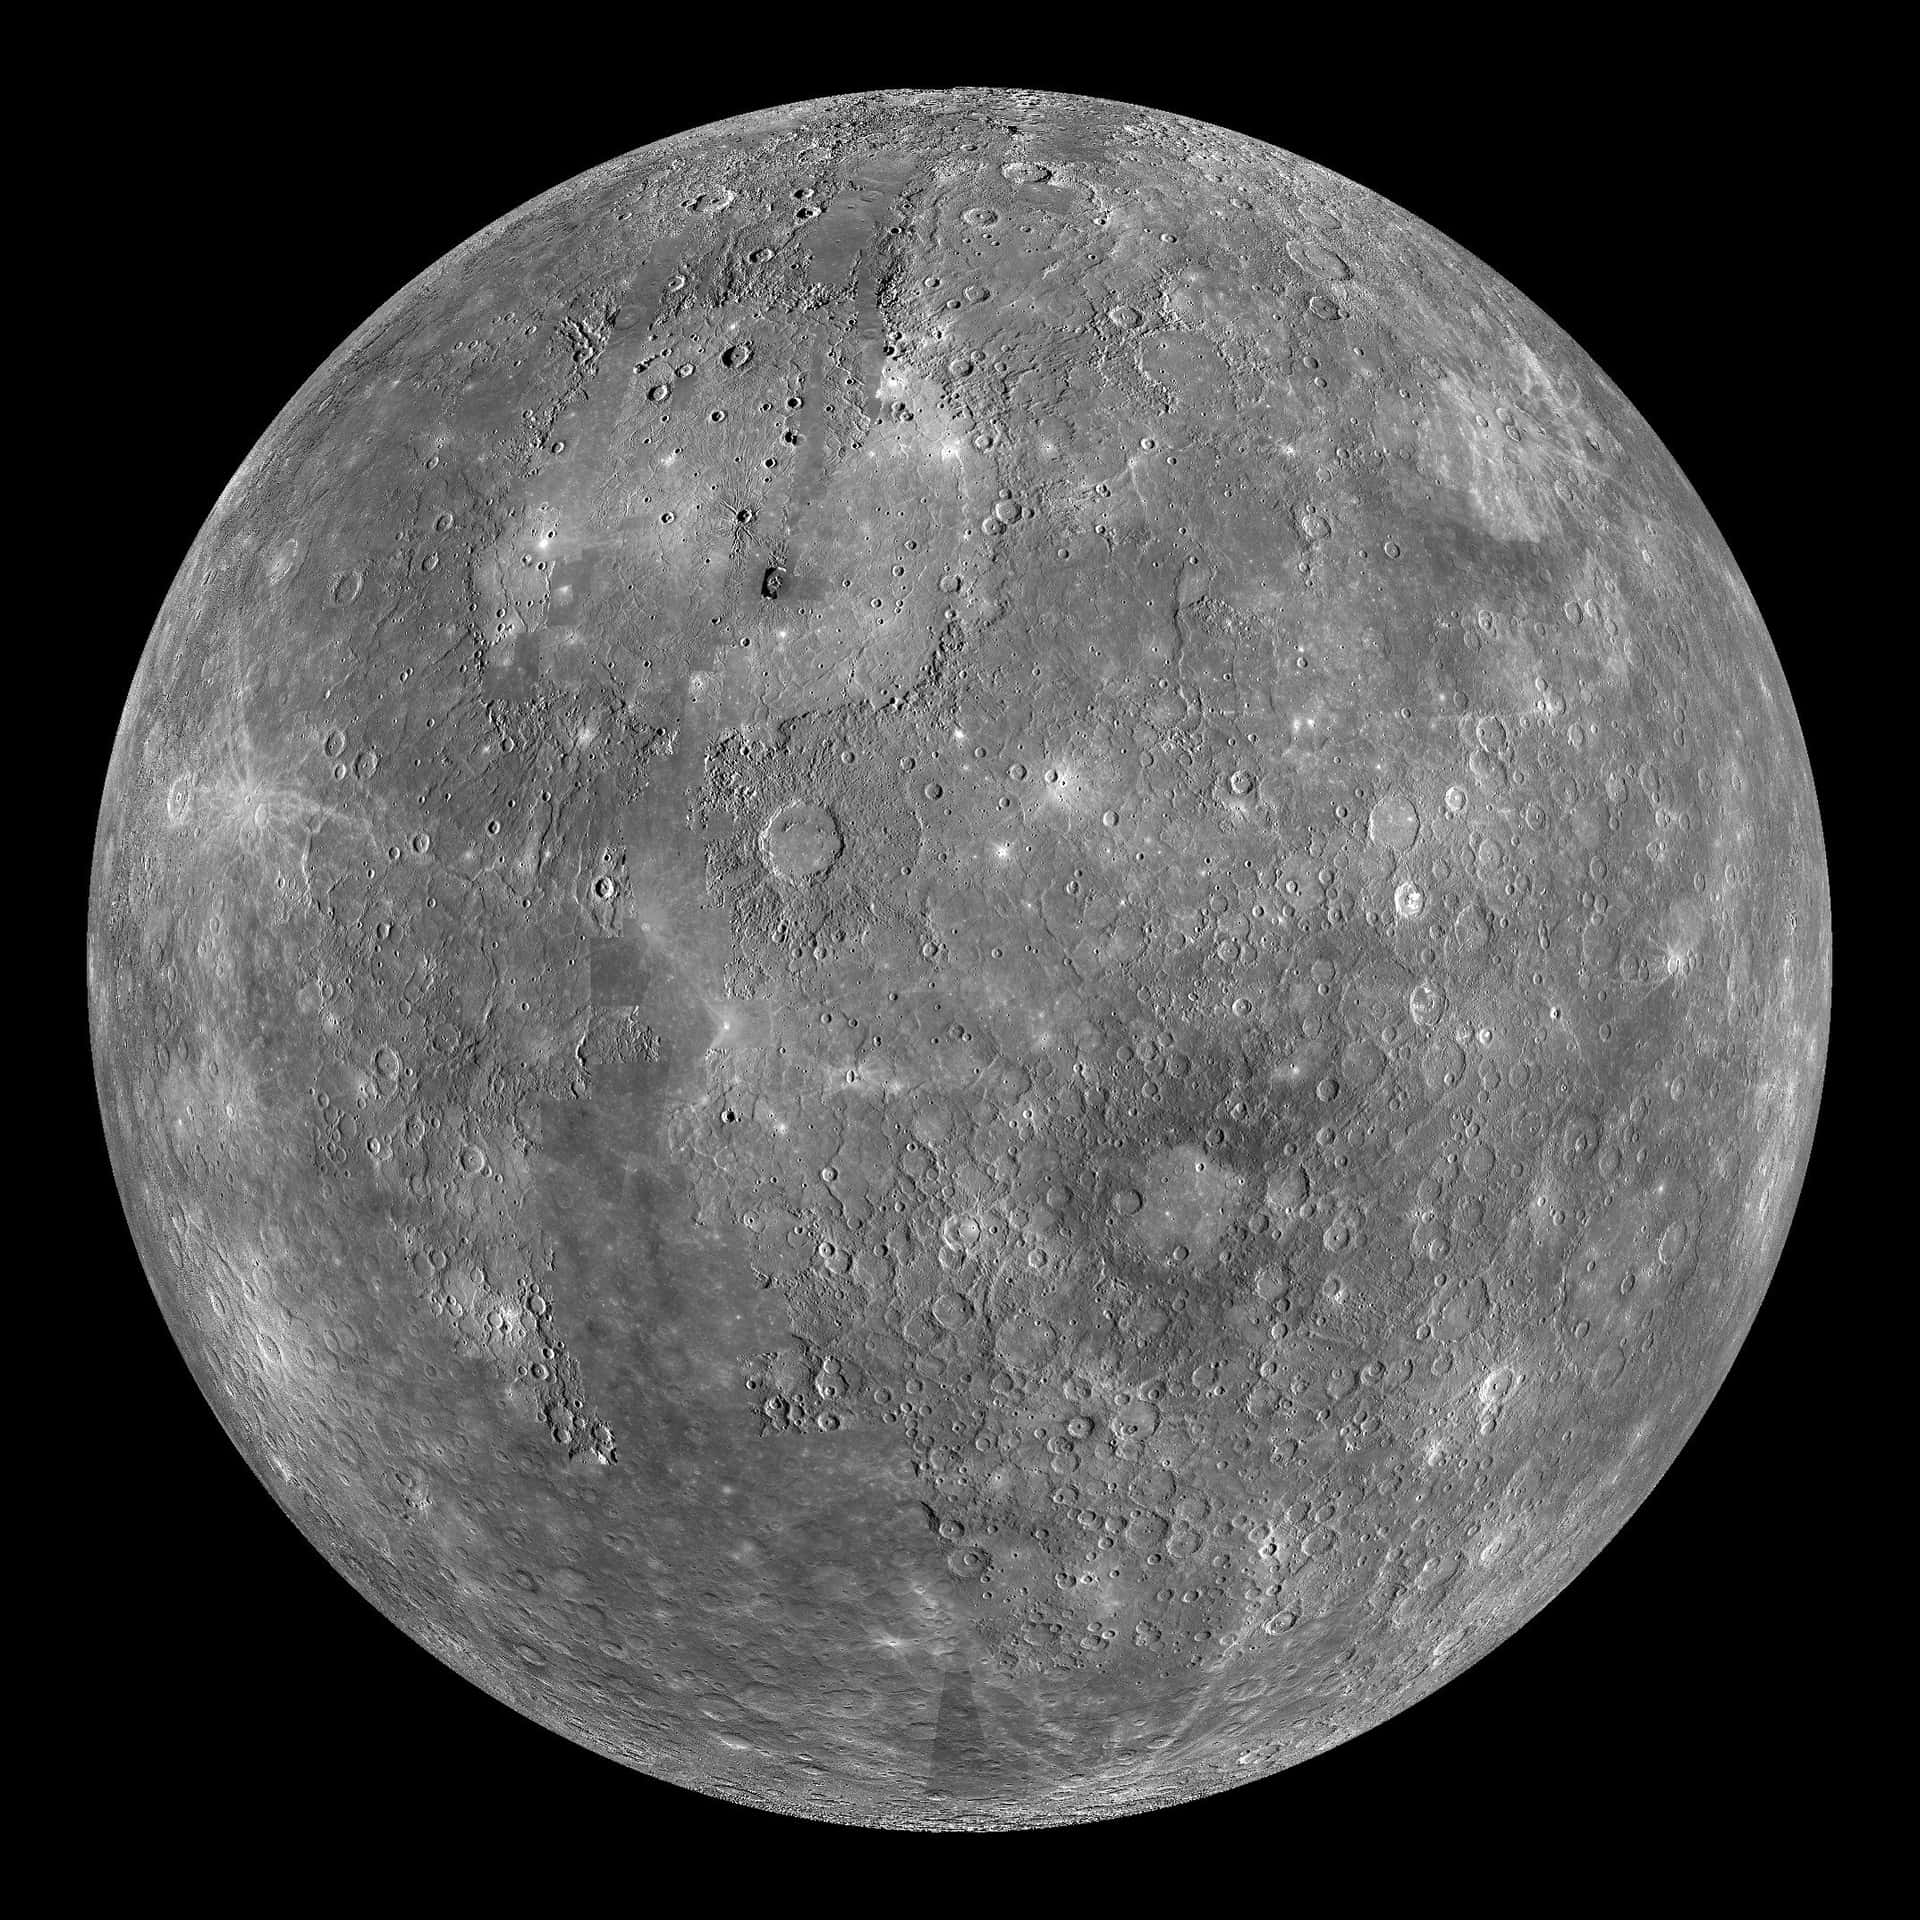 This Mercury is totally out of this world